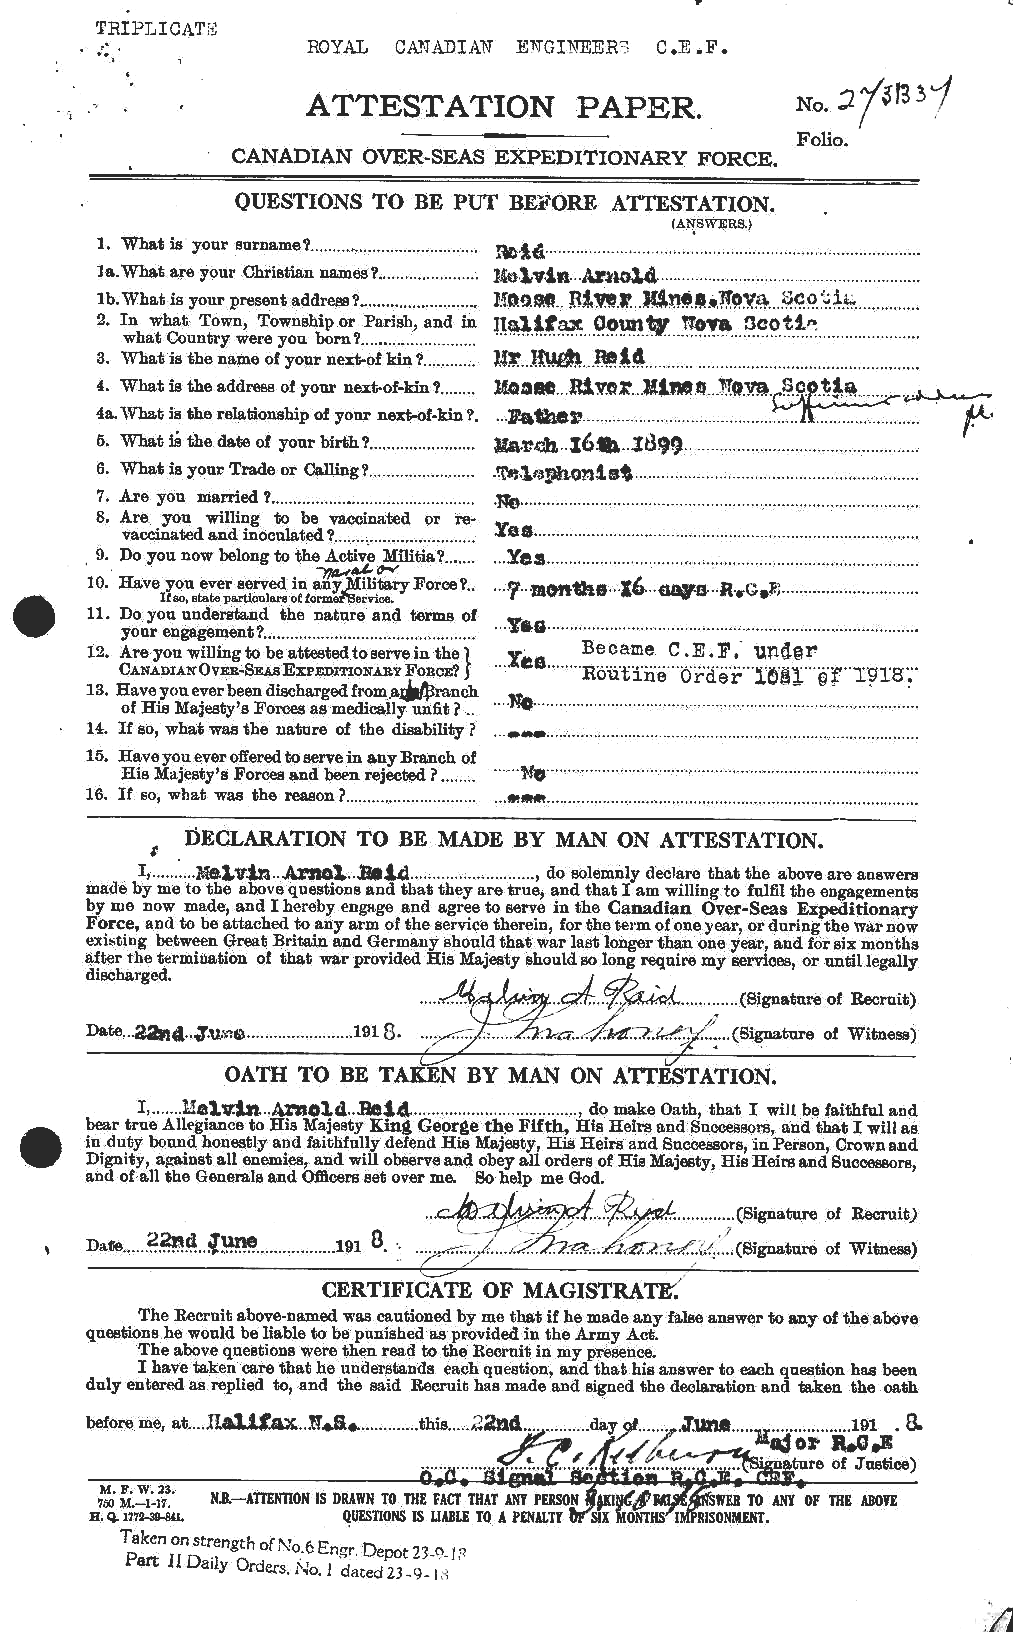 Personnel Records of the First World War - CEF 598951a